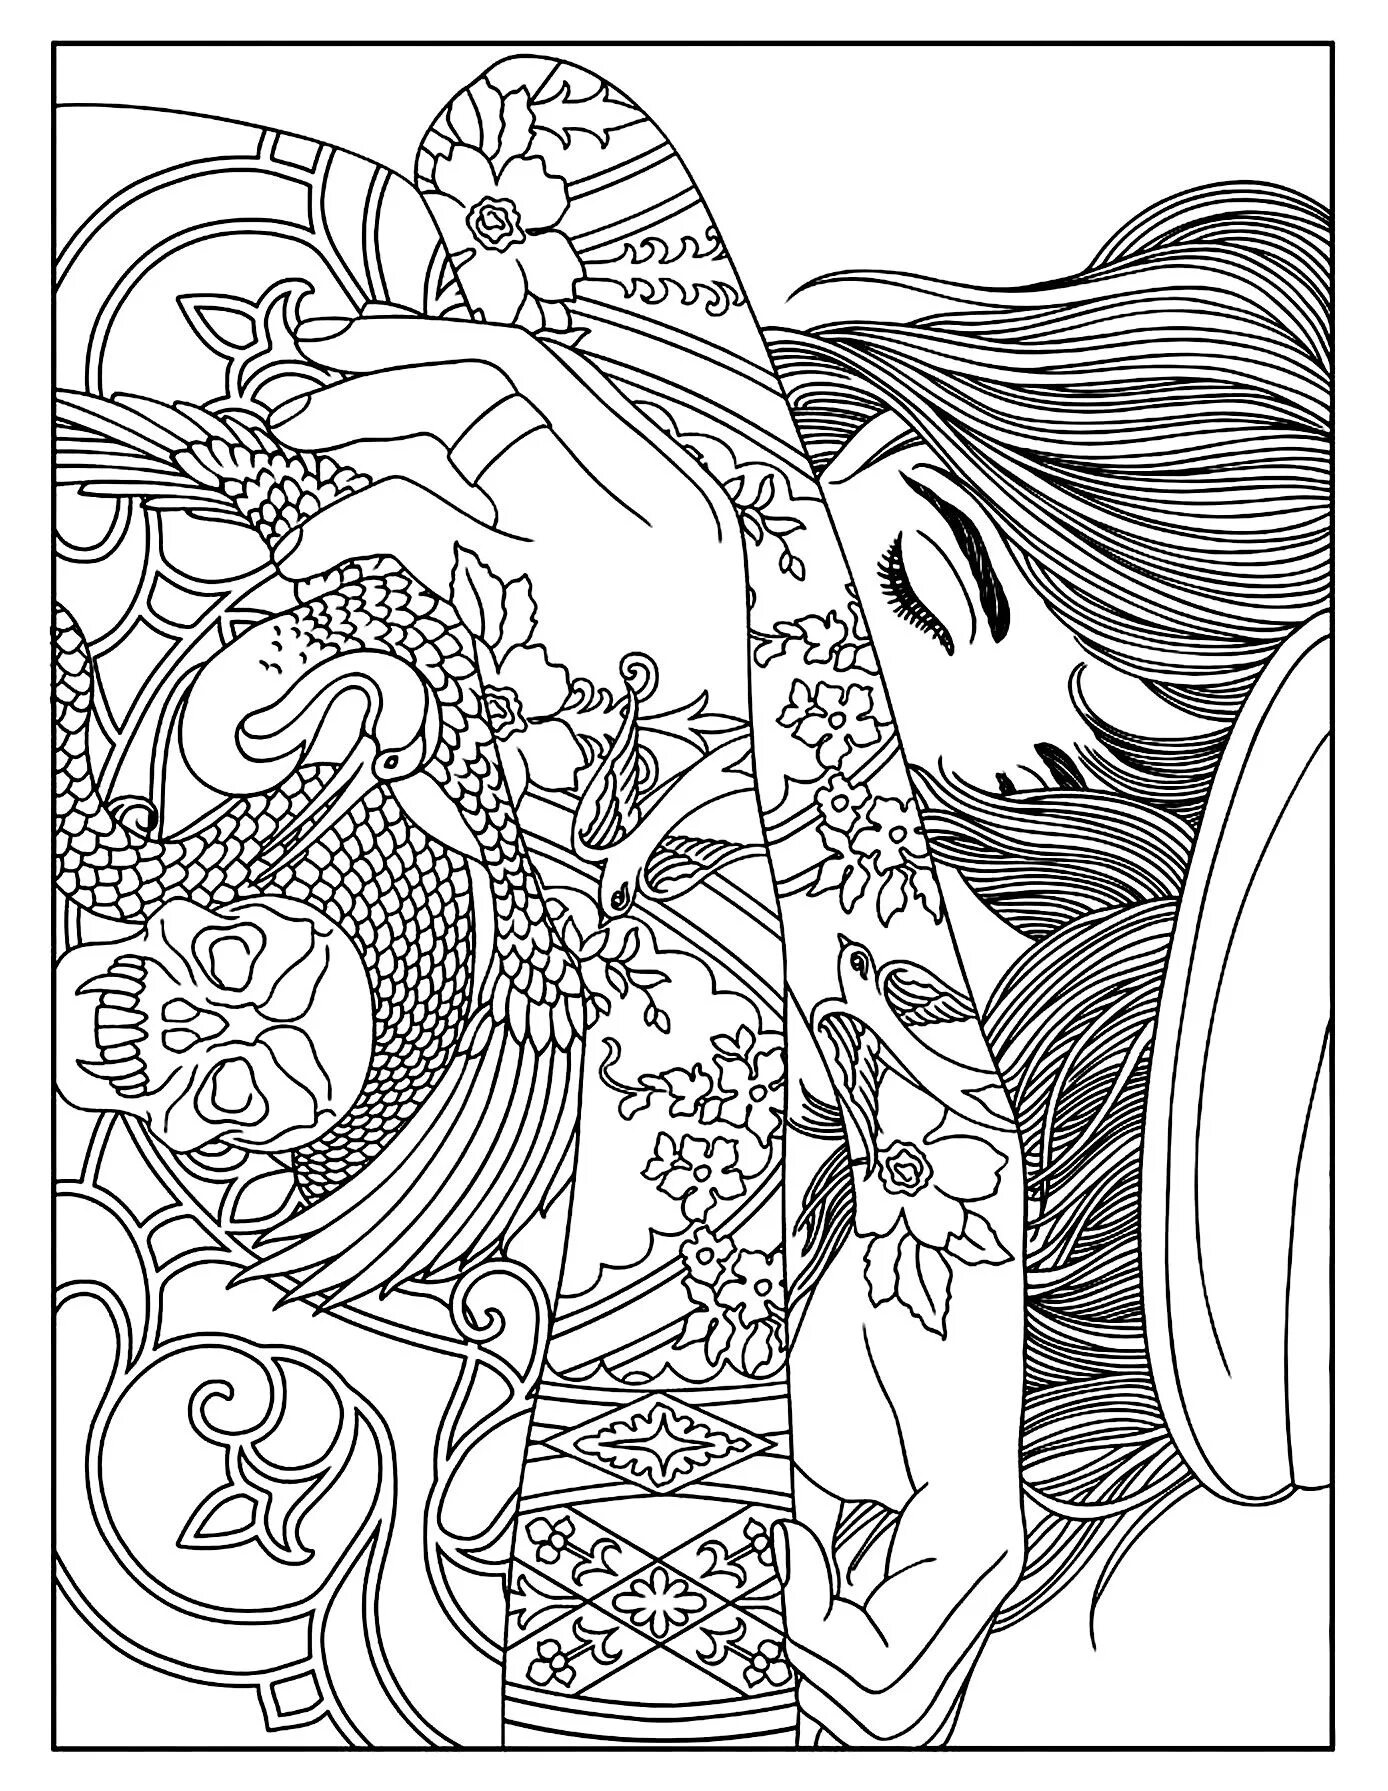 Amazing coloring pages for men and adults